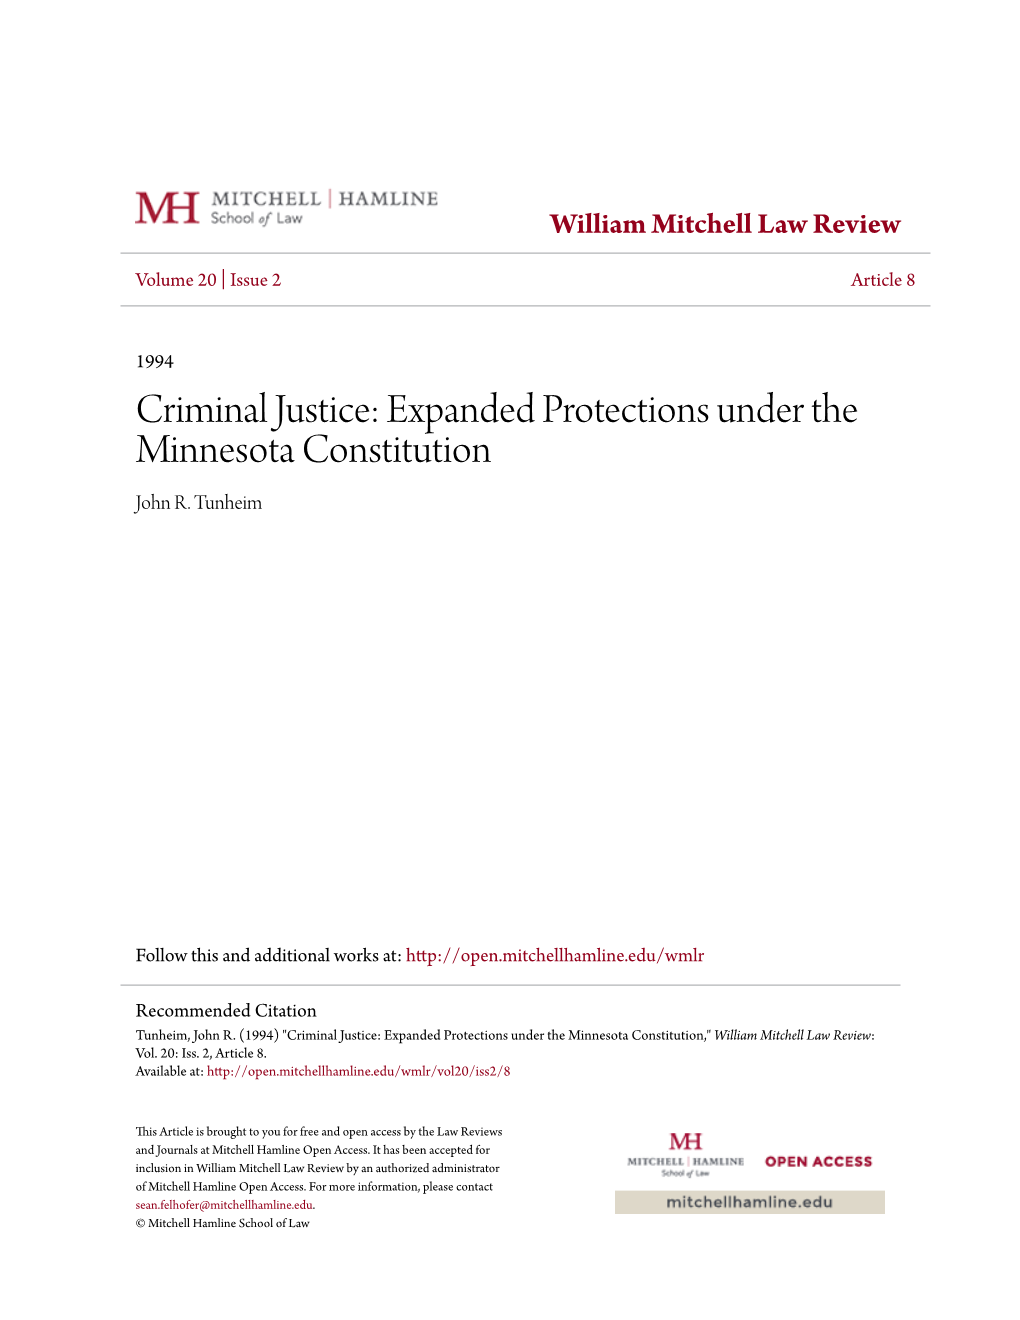 Criminal Justice: Expanded Protections Under the Minnesota Constitution John R